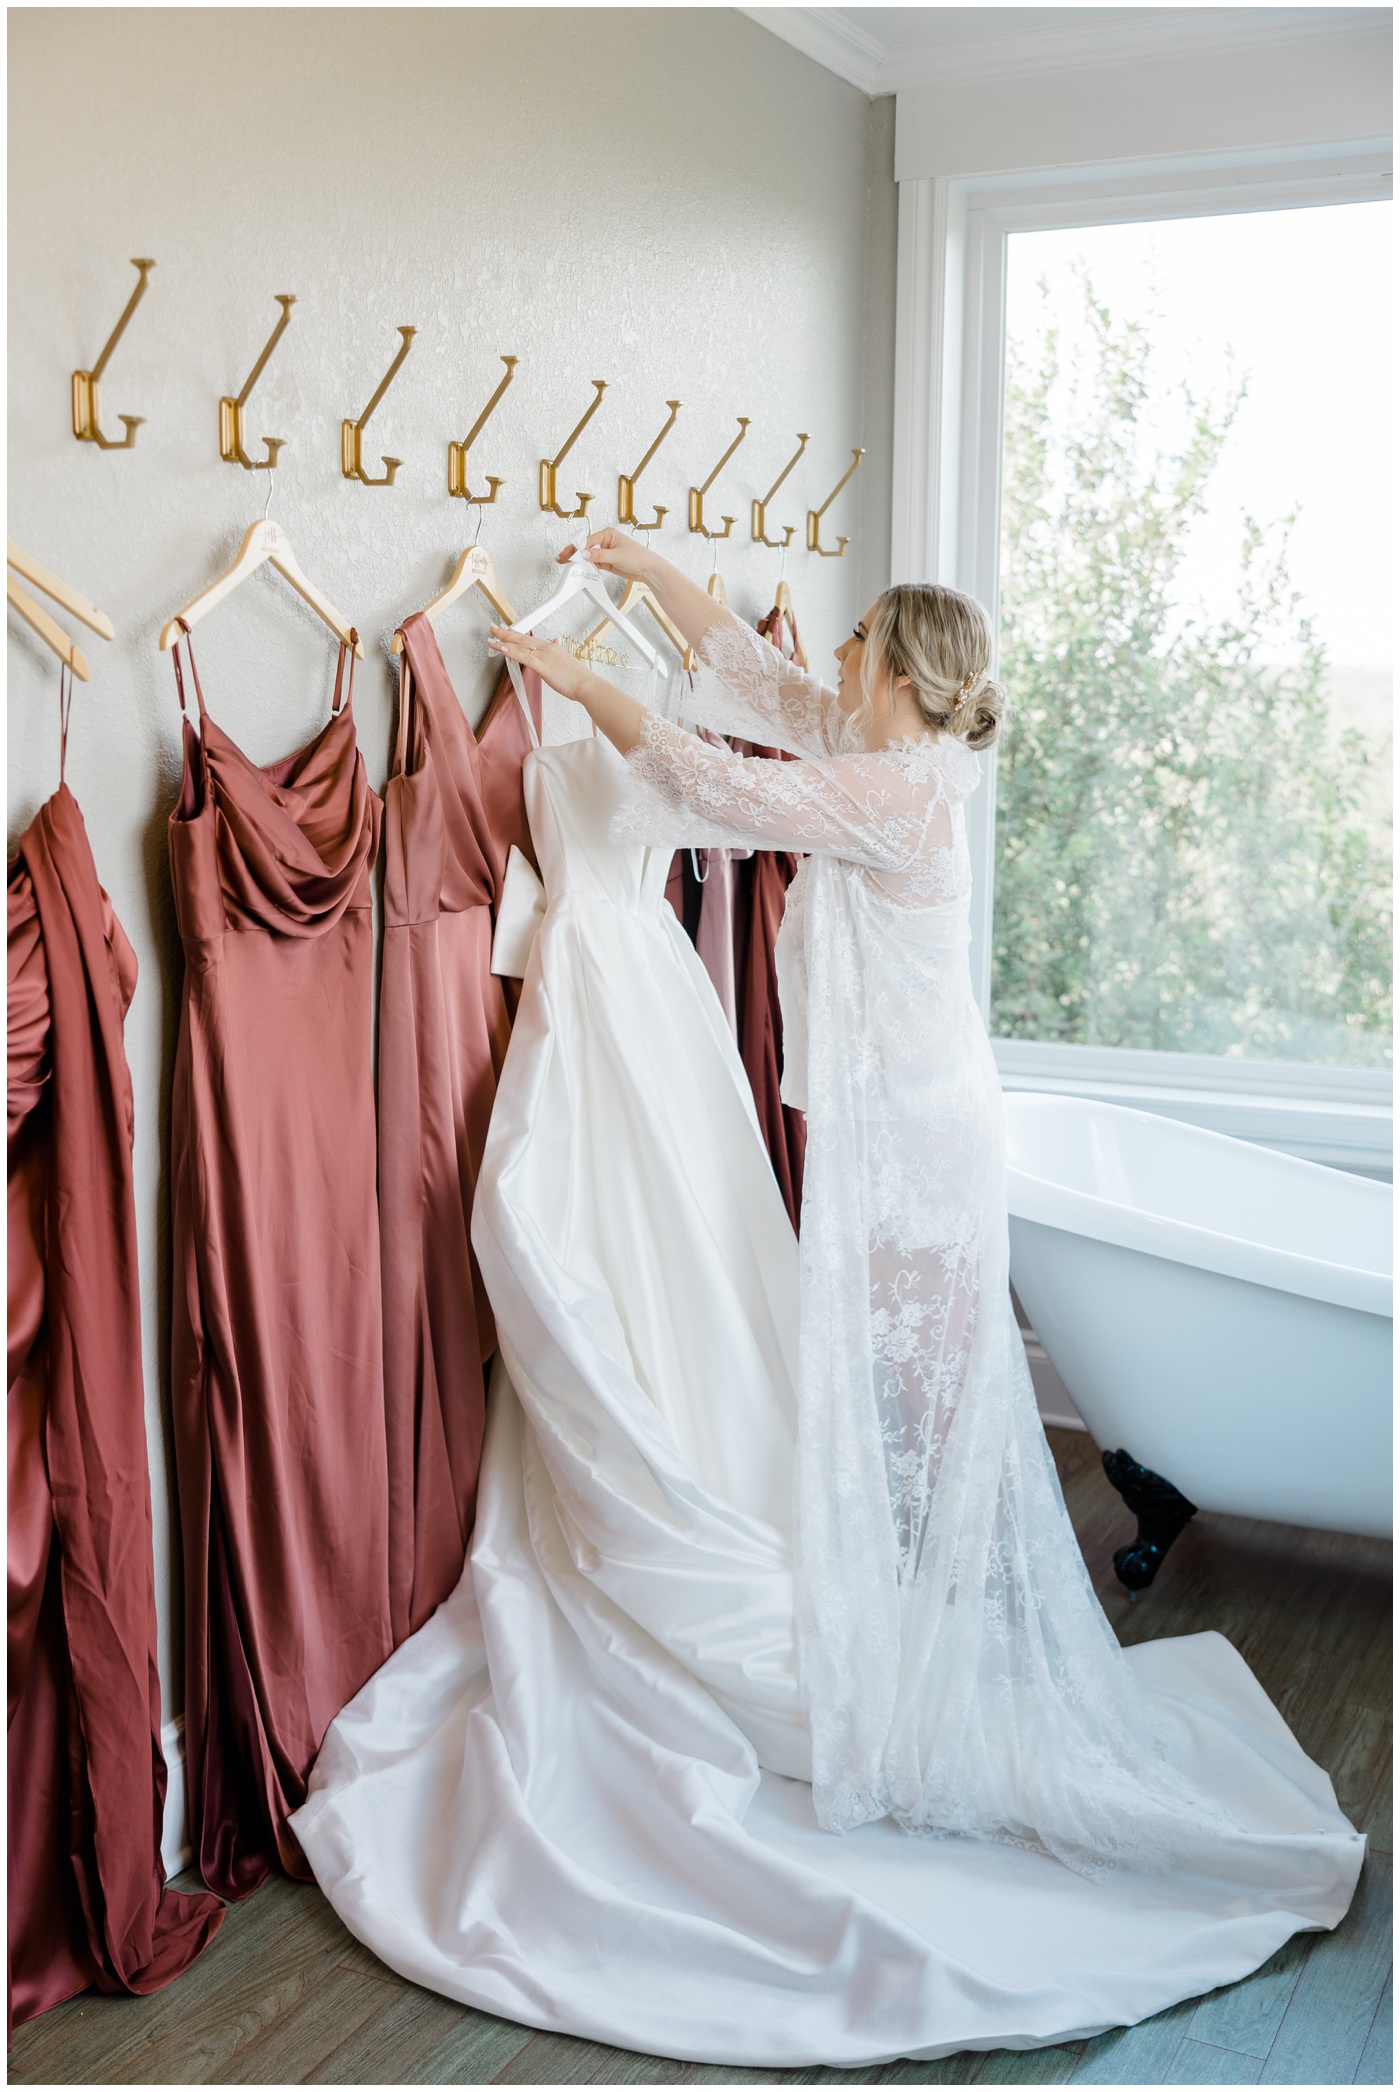 A bride hangs up her wedding dress at Kendall Point wedding venue